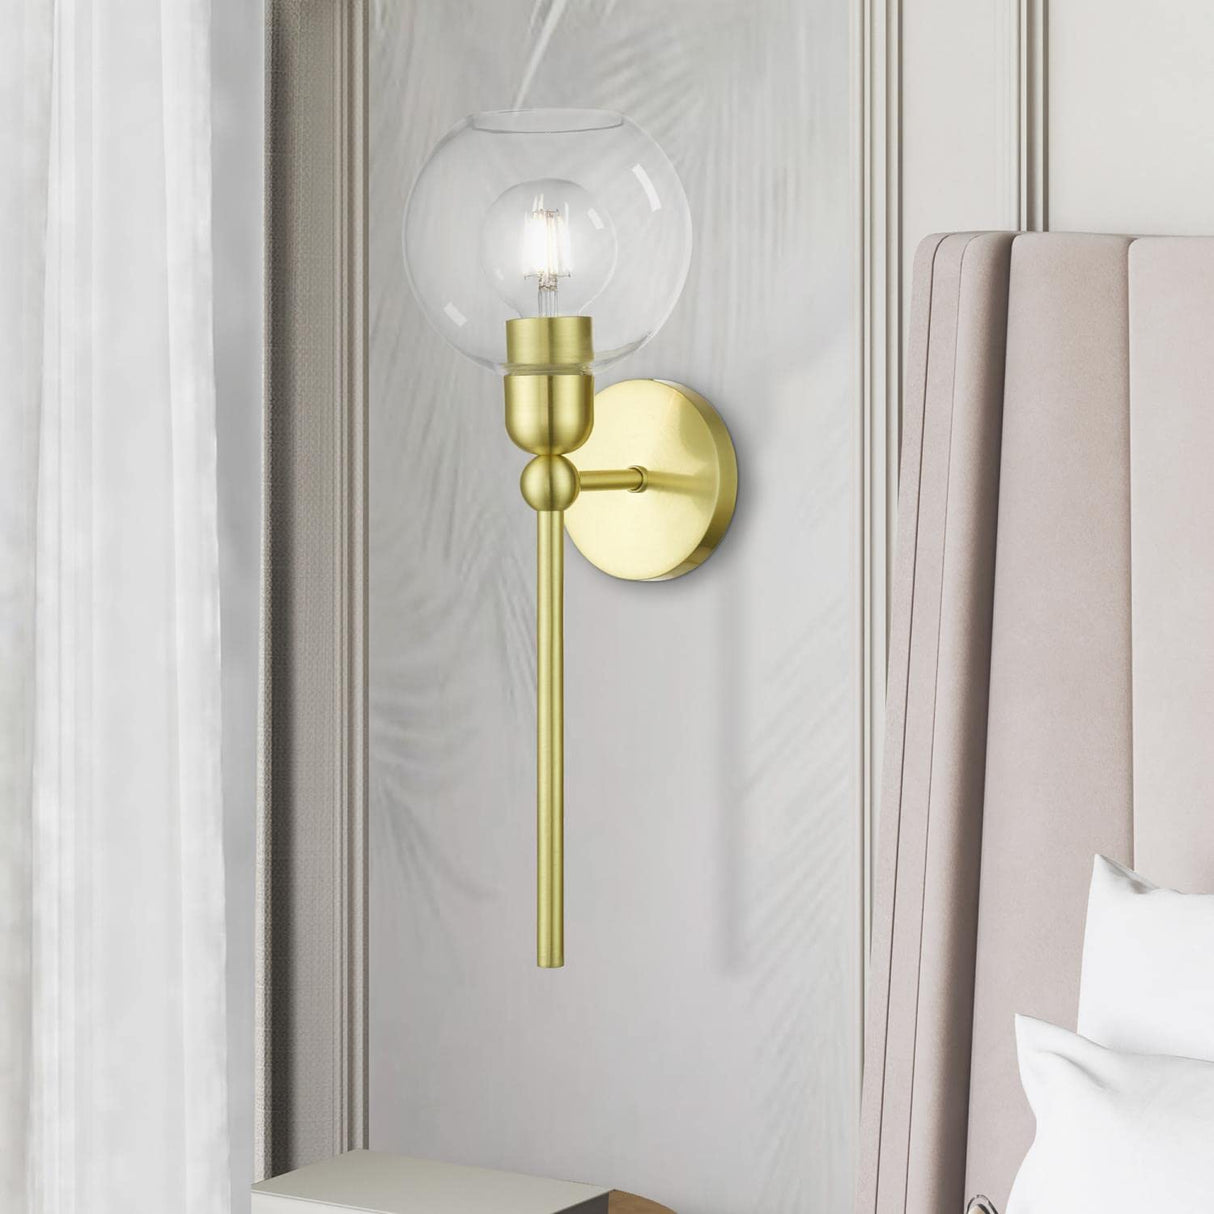 Downtown 1 Light Sconce in Satin Brass (16971-12)